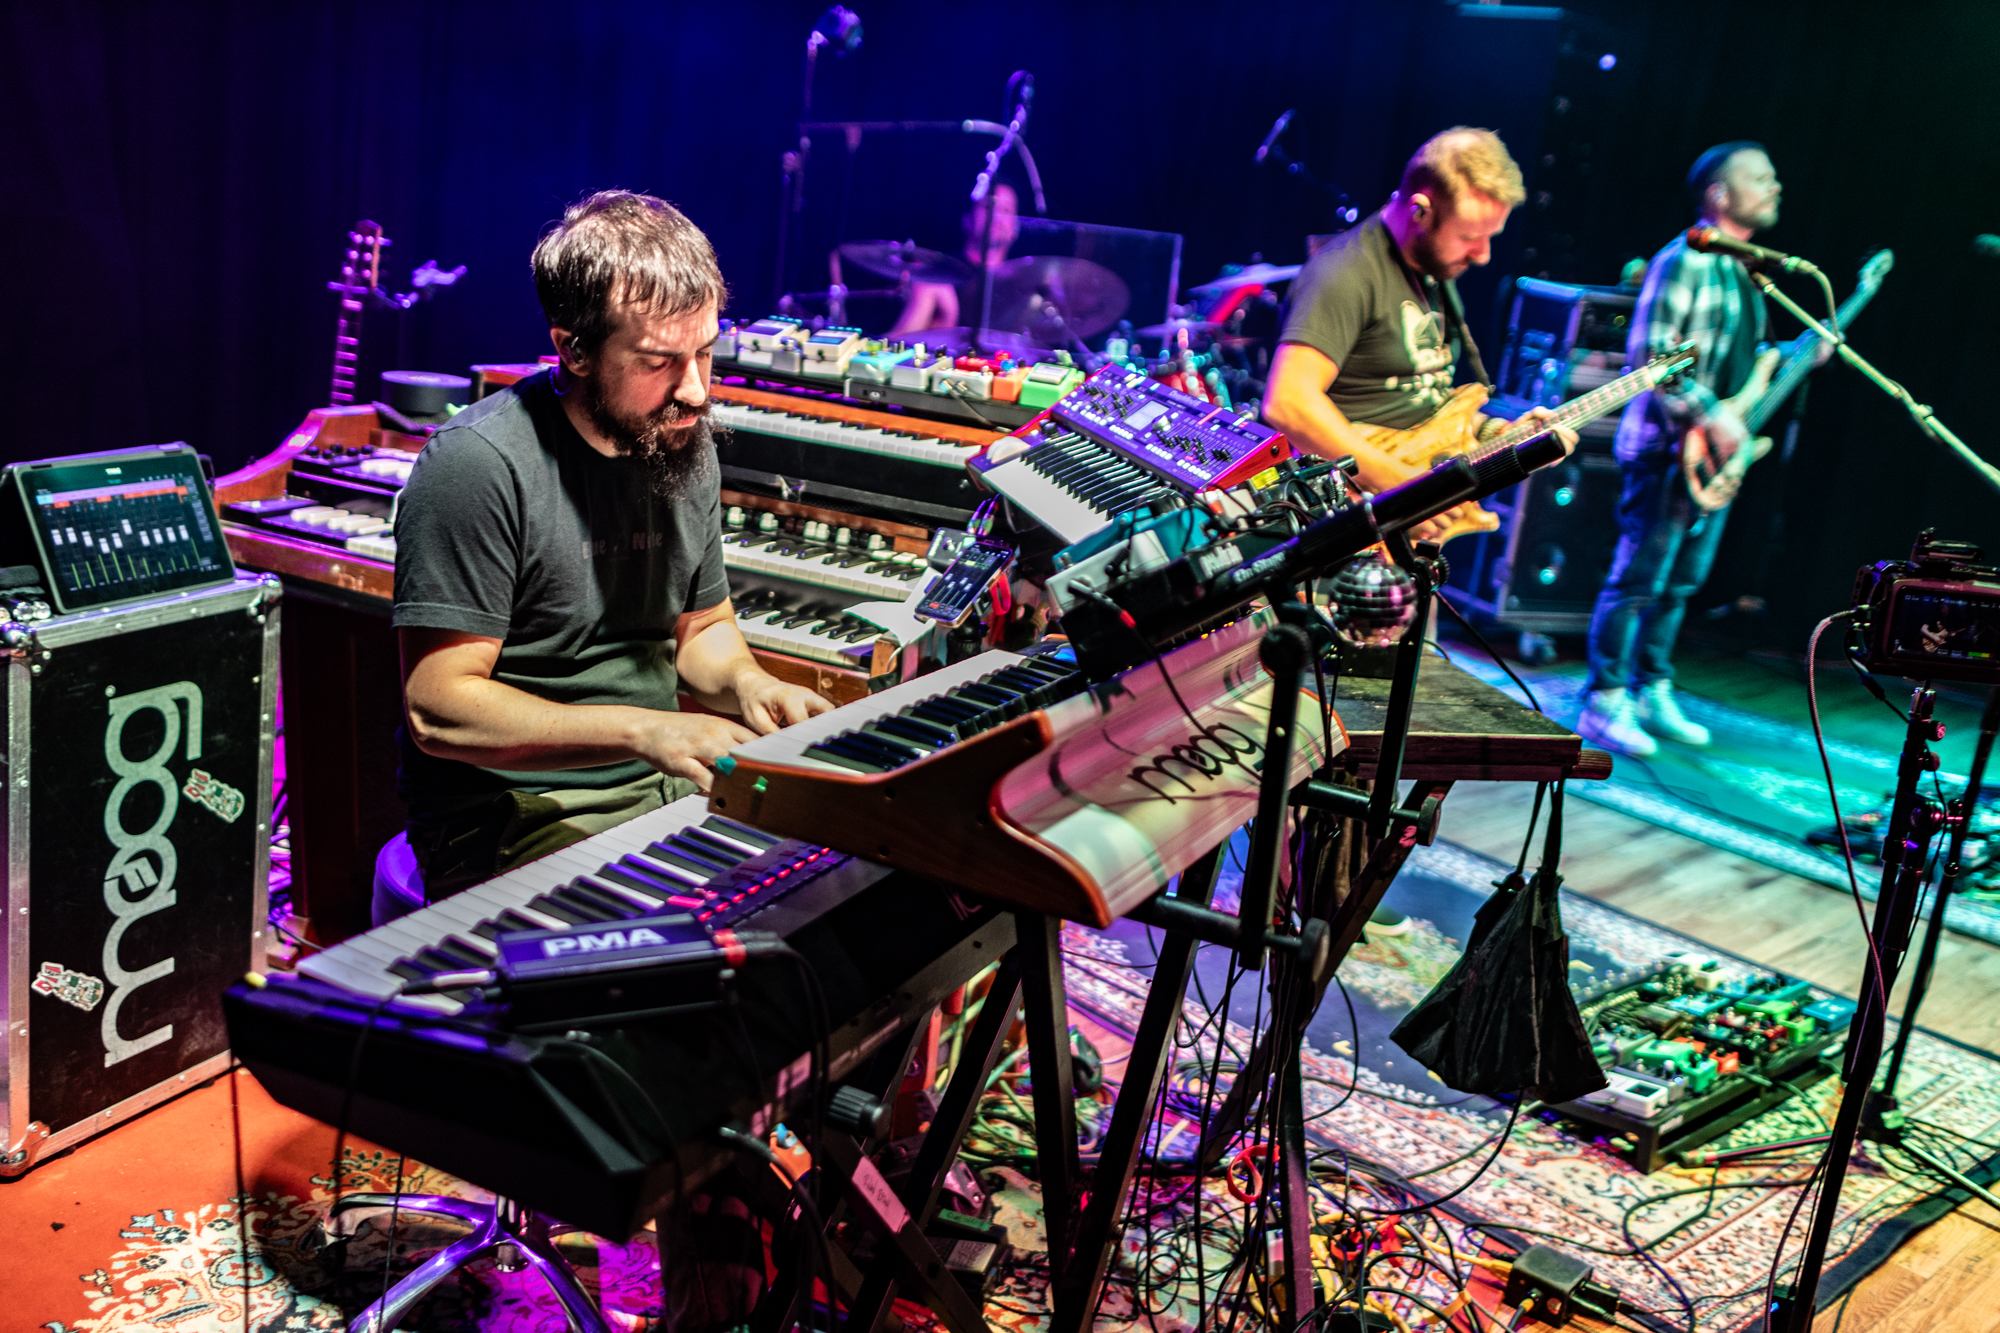 Spafford Set to Rock Dillon Amphitheater with Free Concert on July 15